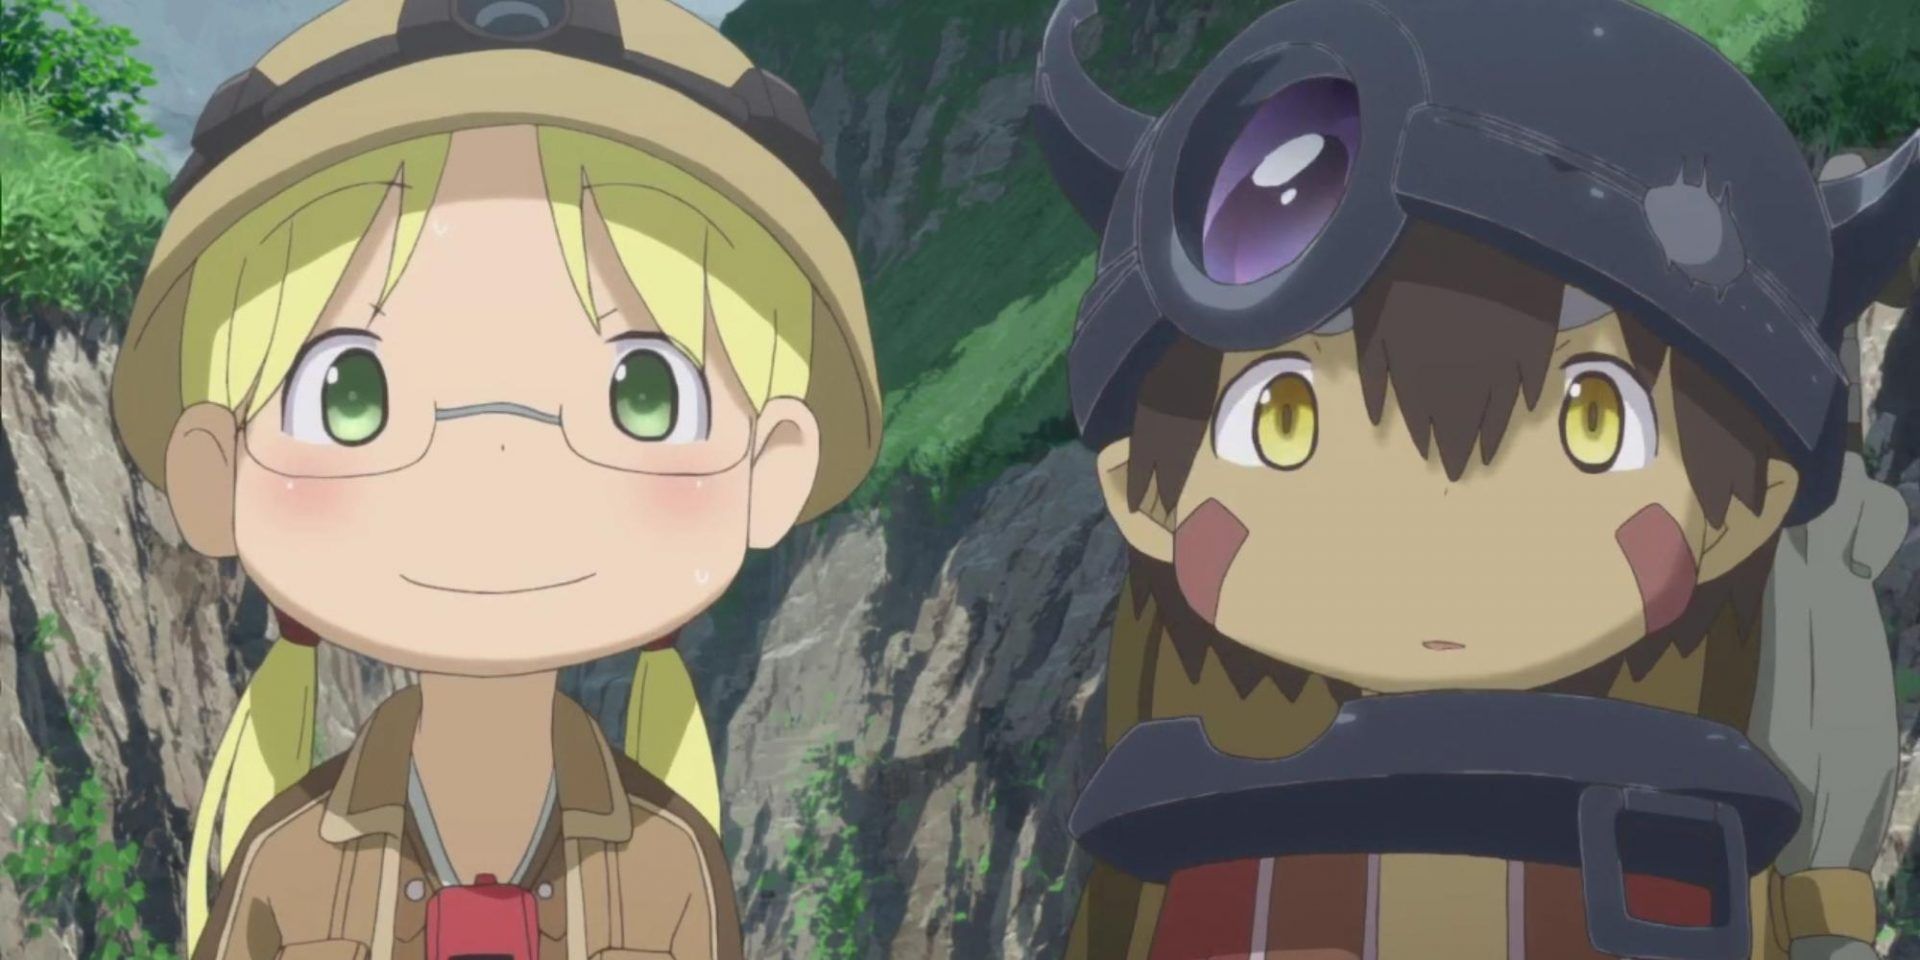 Made in Abyss season 2 episode 6 release